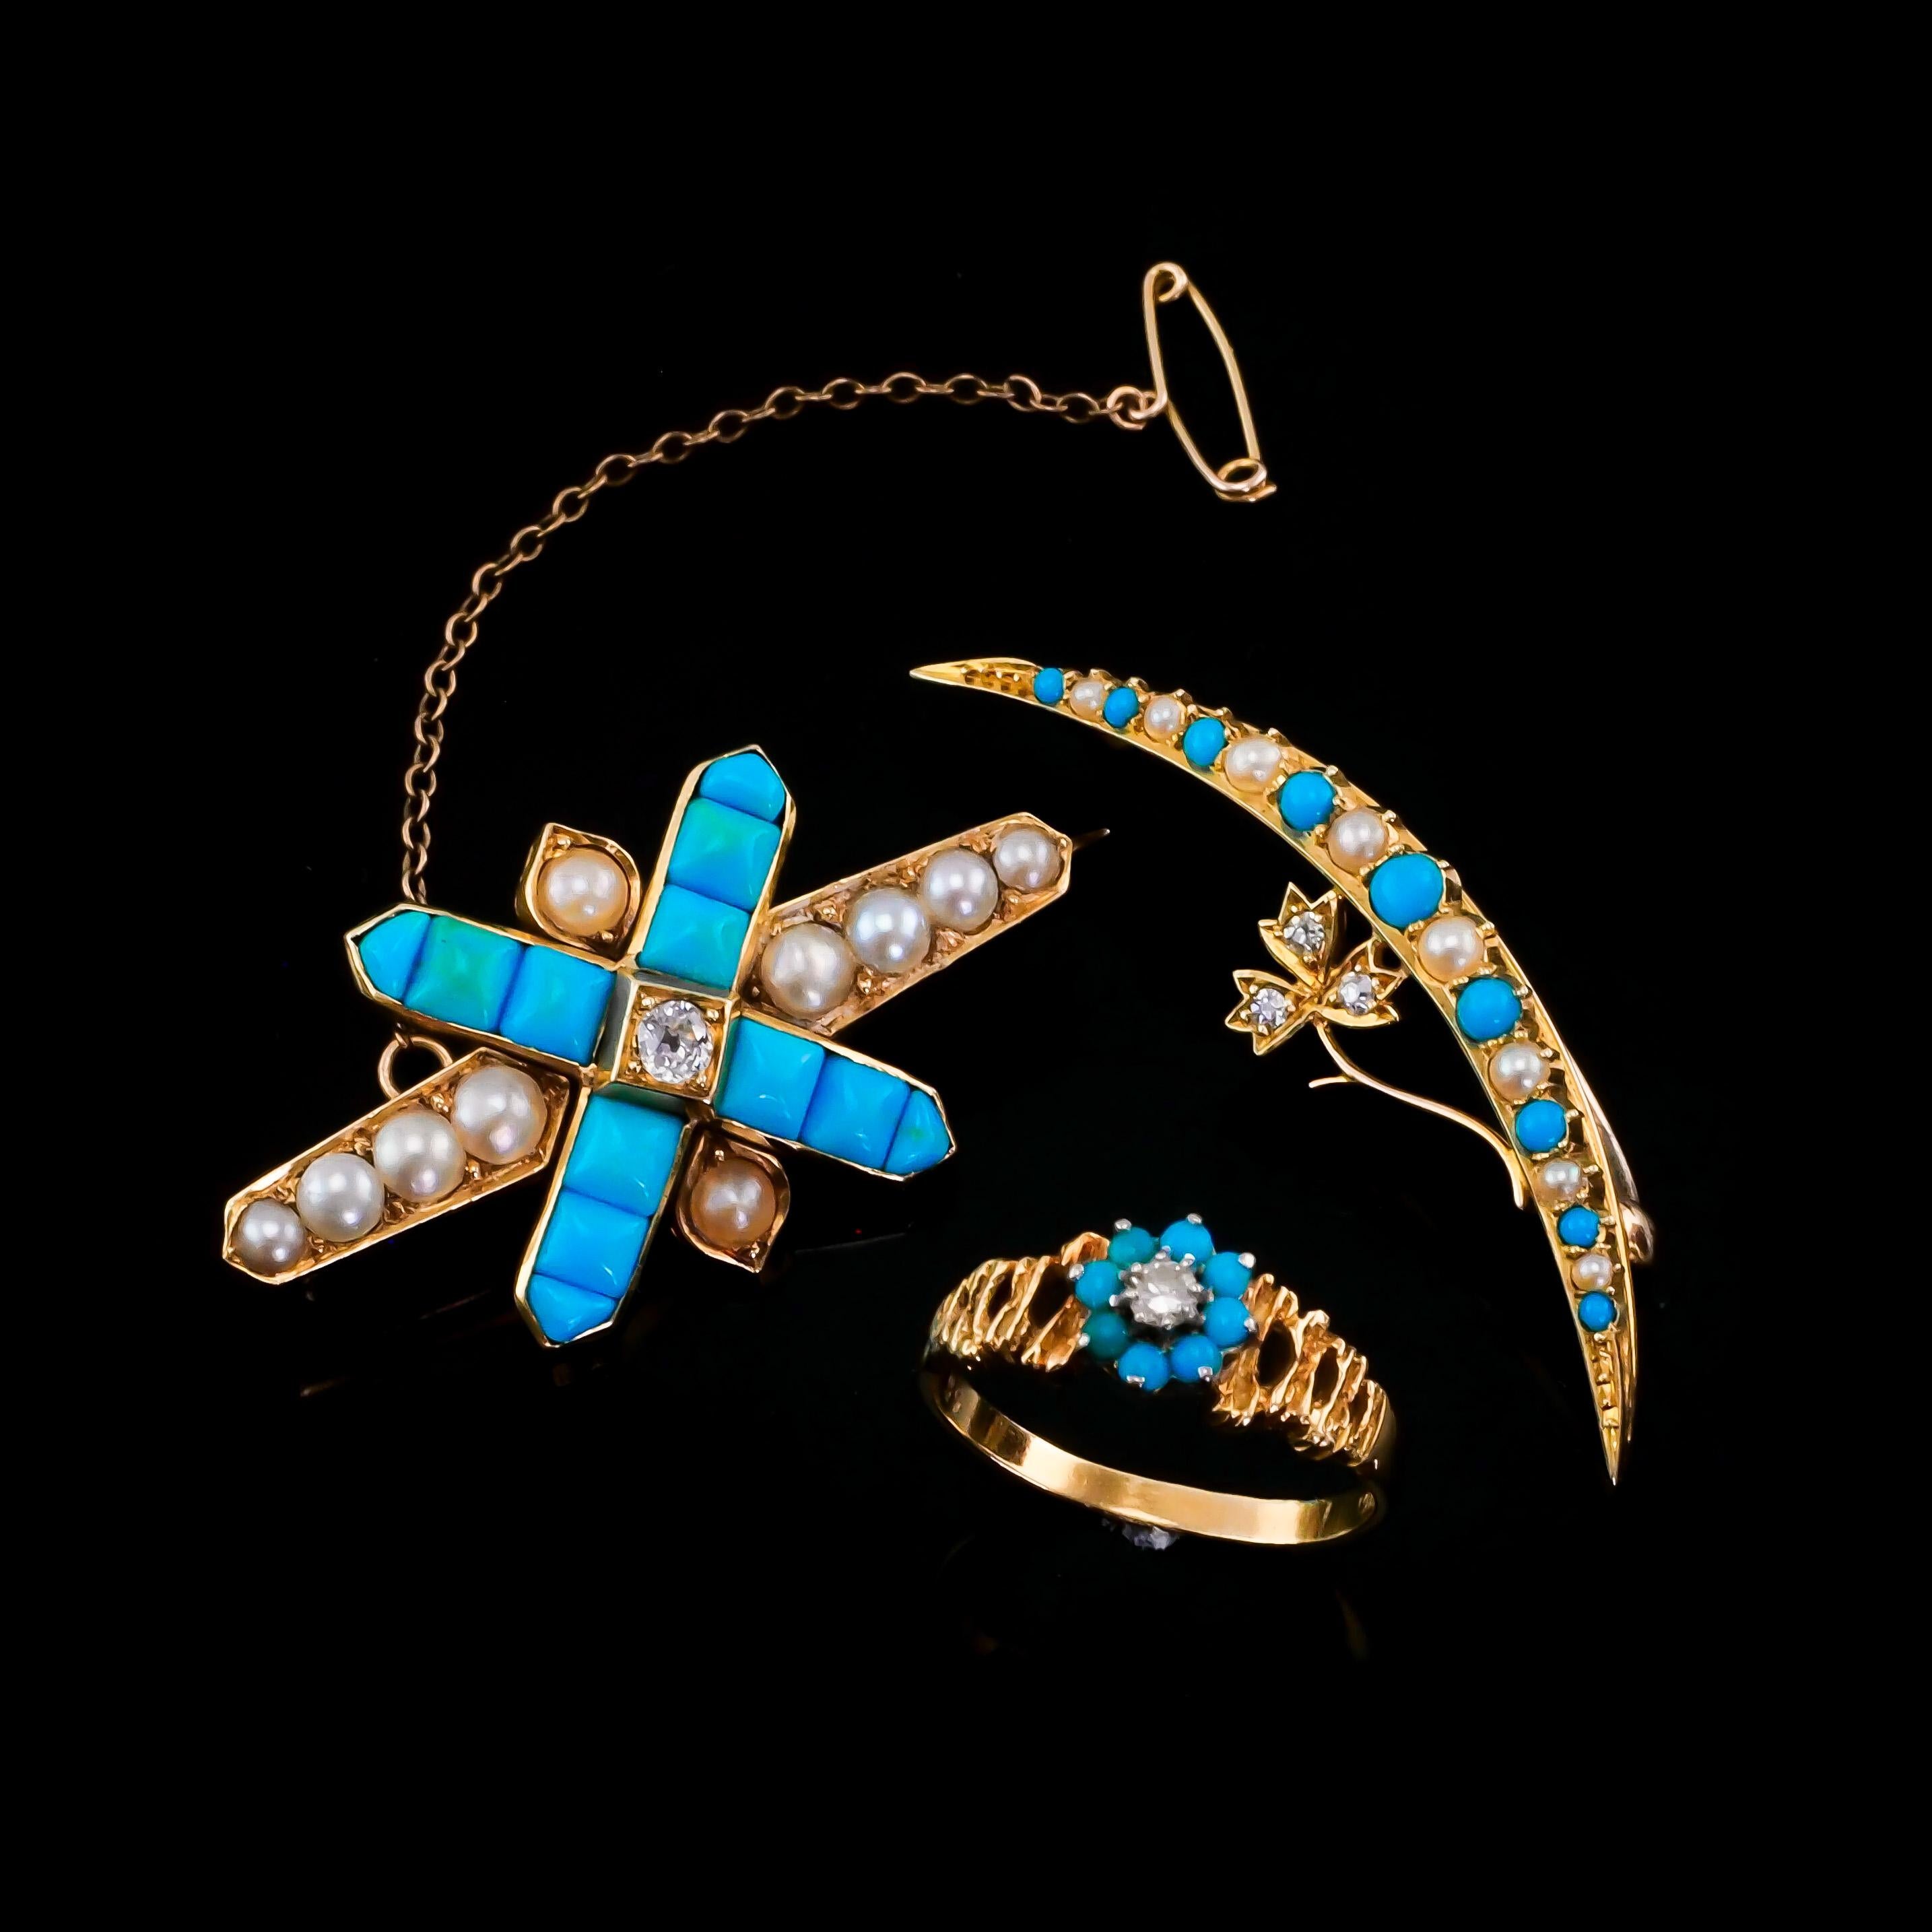 Antique Victorian 15k Gold Turquoise, Pearl & Diamond Crescent Brooch, c.1900 For Sale 13